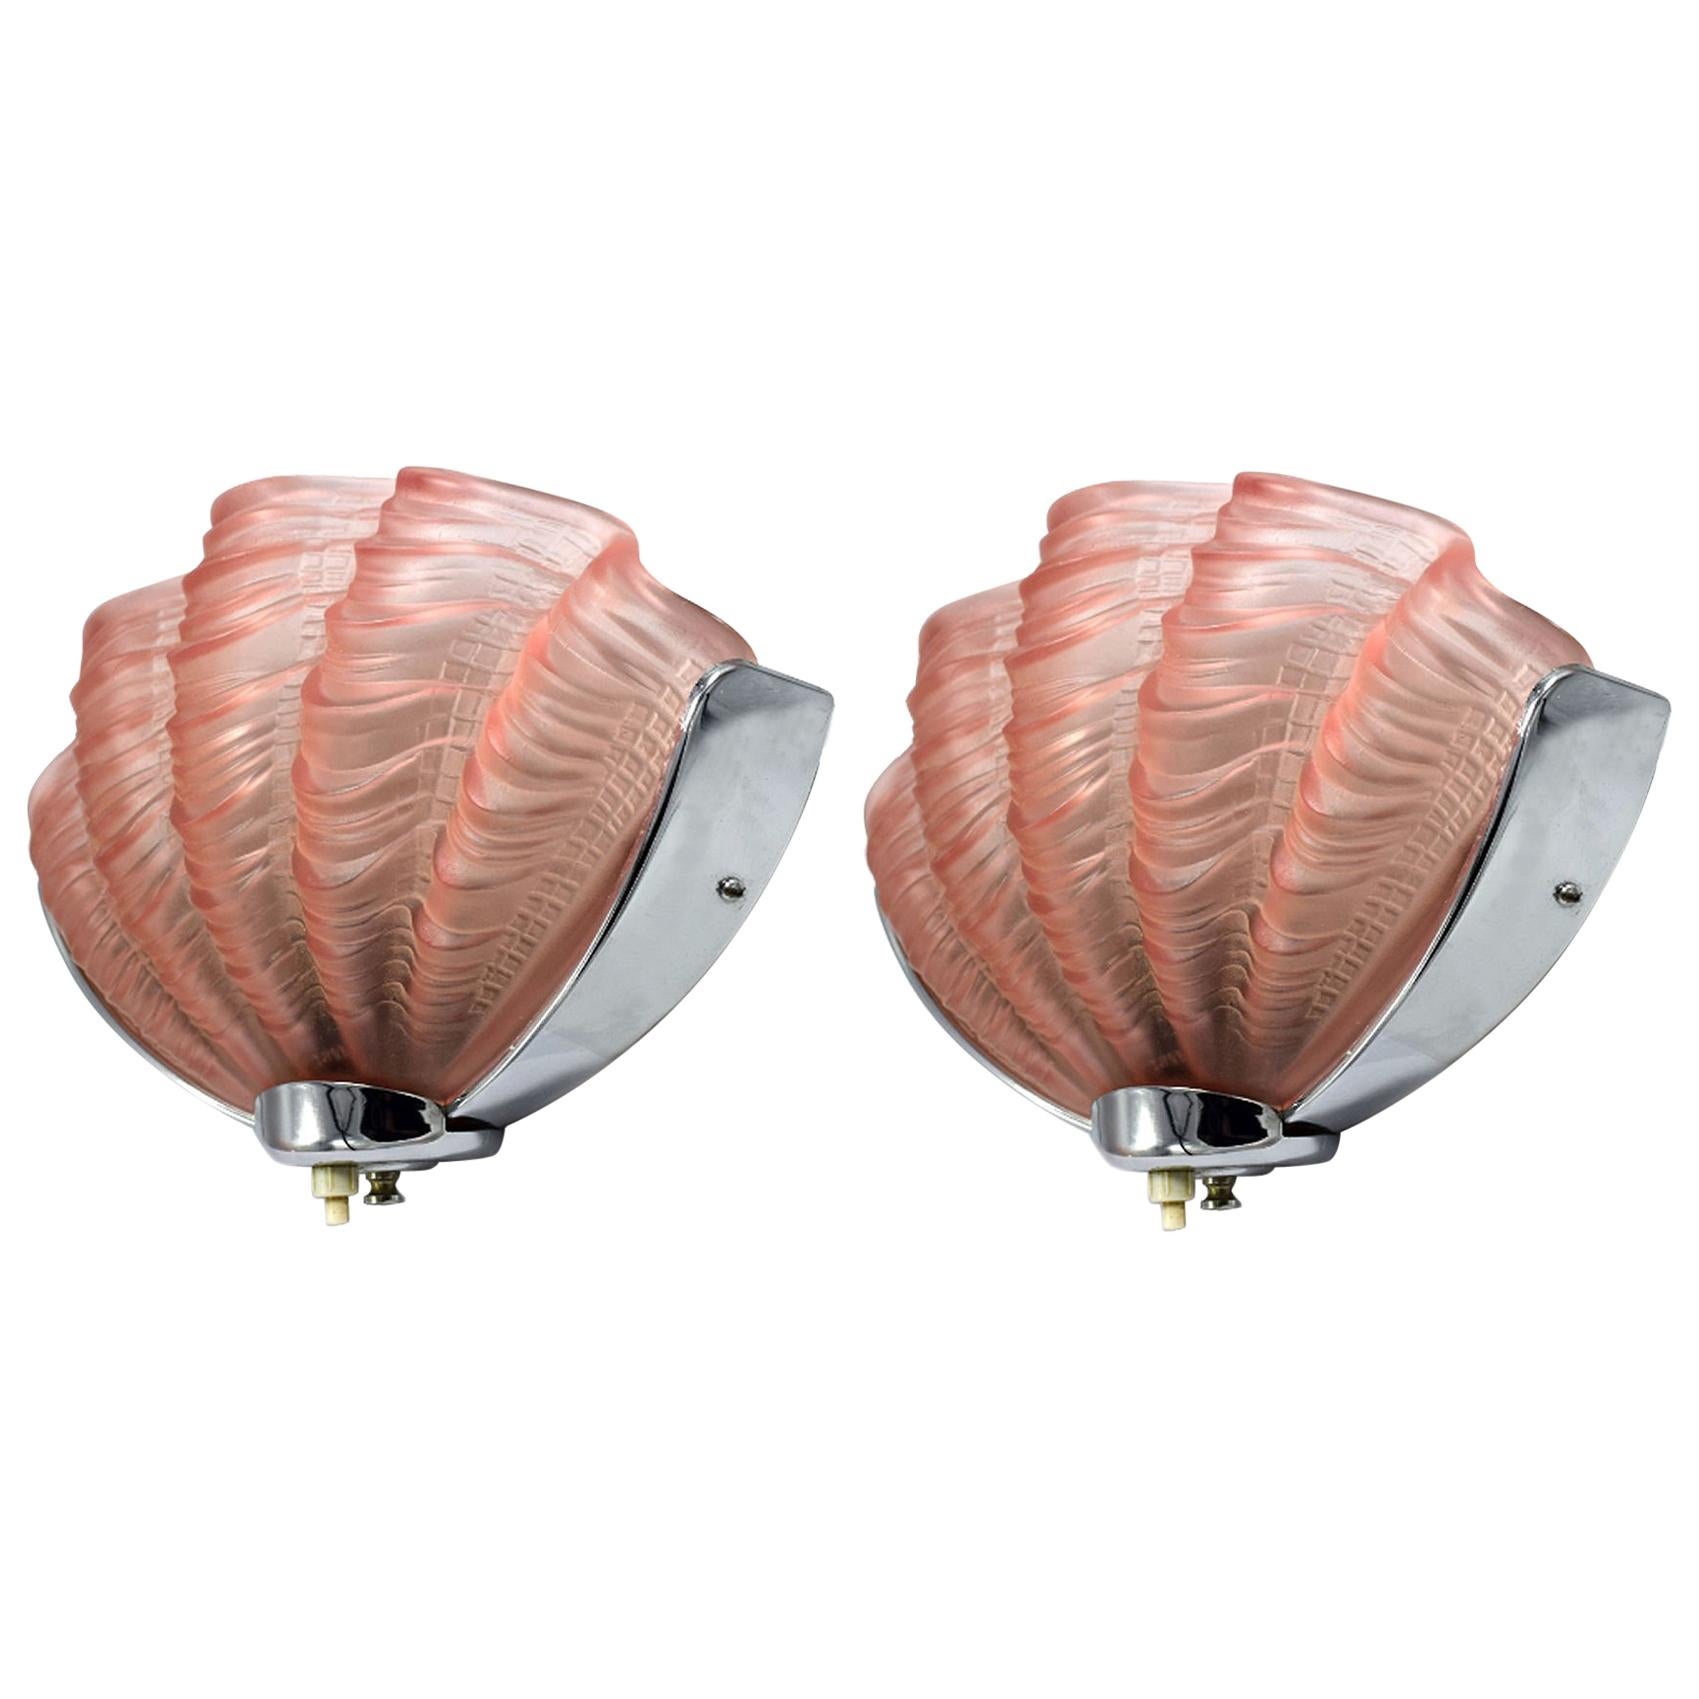 1930s Art Deco Soft Pink Pair of Matching Shell Wall Light Sconces